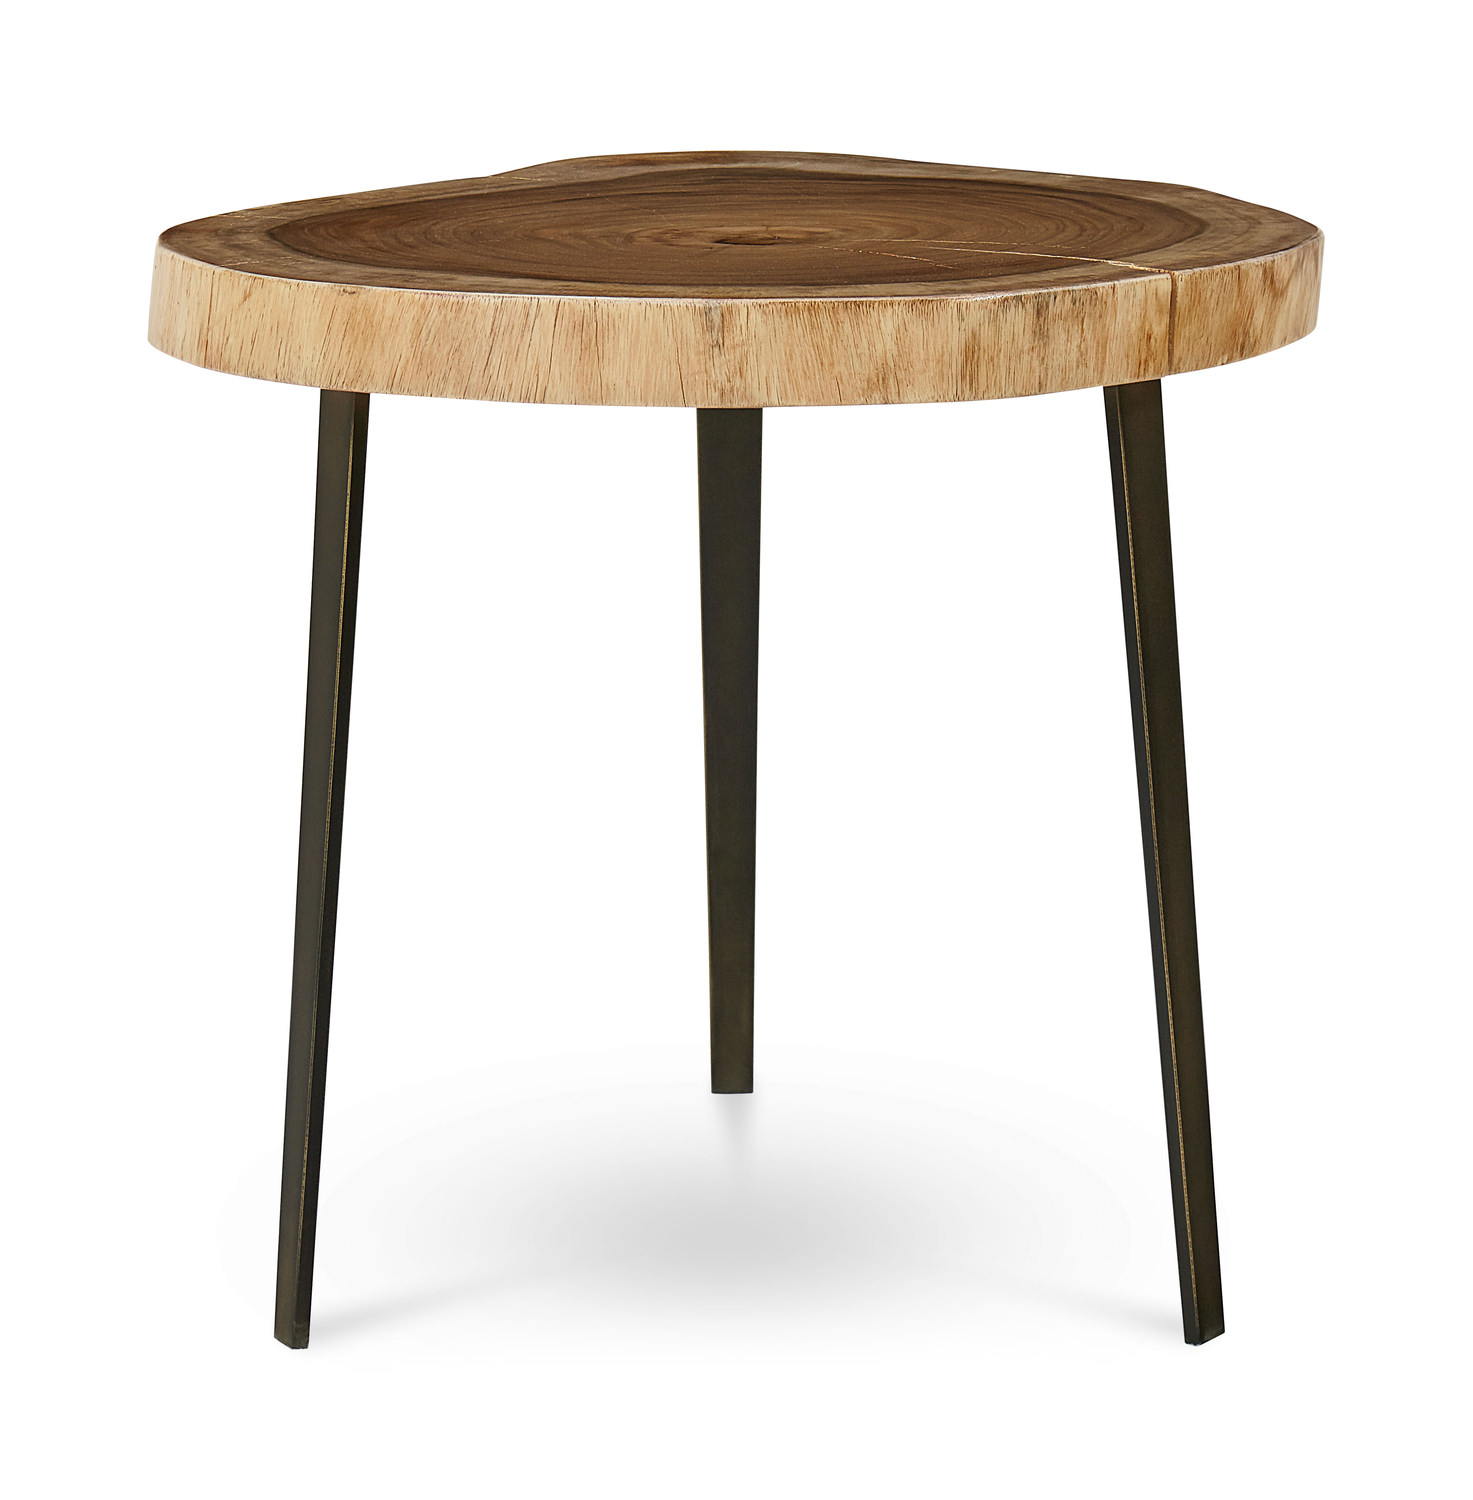 Round edge. Стол Live Edge круглый на улице. Side Table. Circle Table. Curved Table.